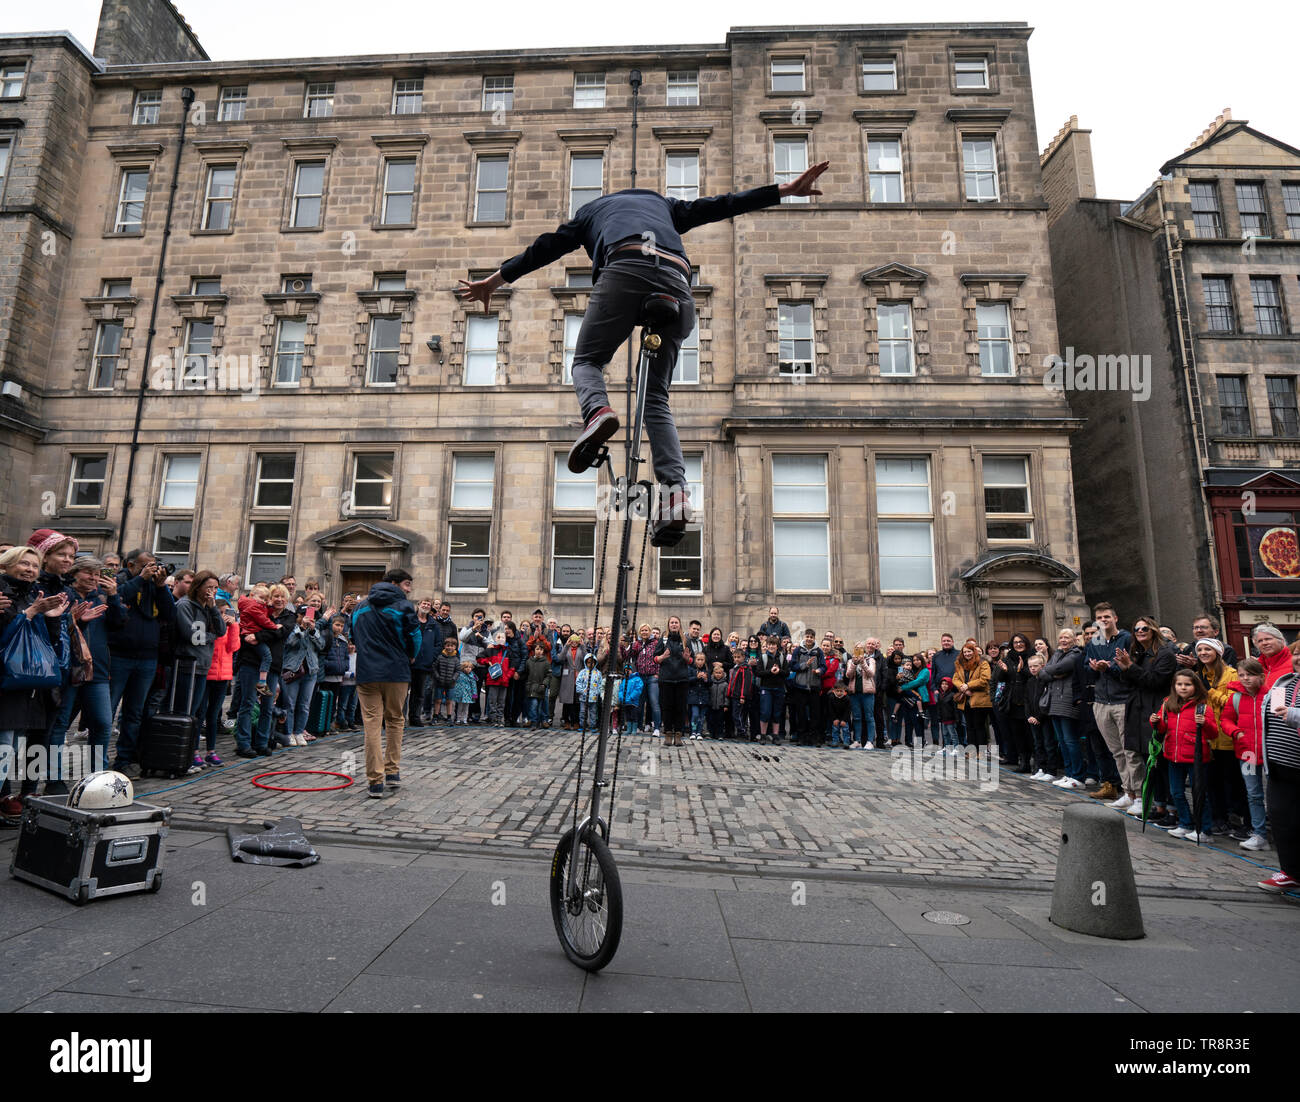 Street performer on unicycle performs to crowd on the High Street Royal Mile in Edinburgh Old Town, Scotland, UK Stock Photo